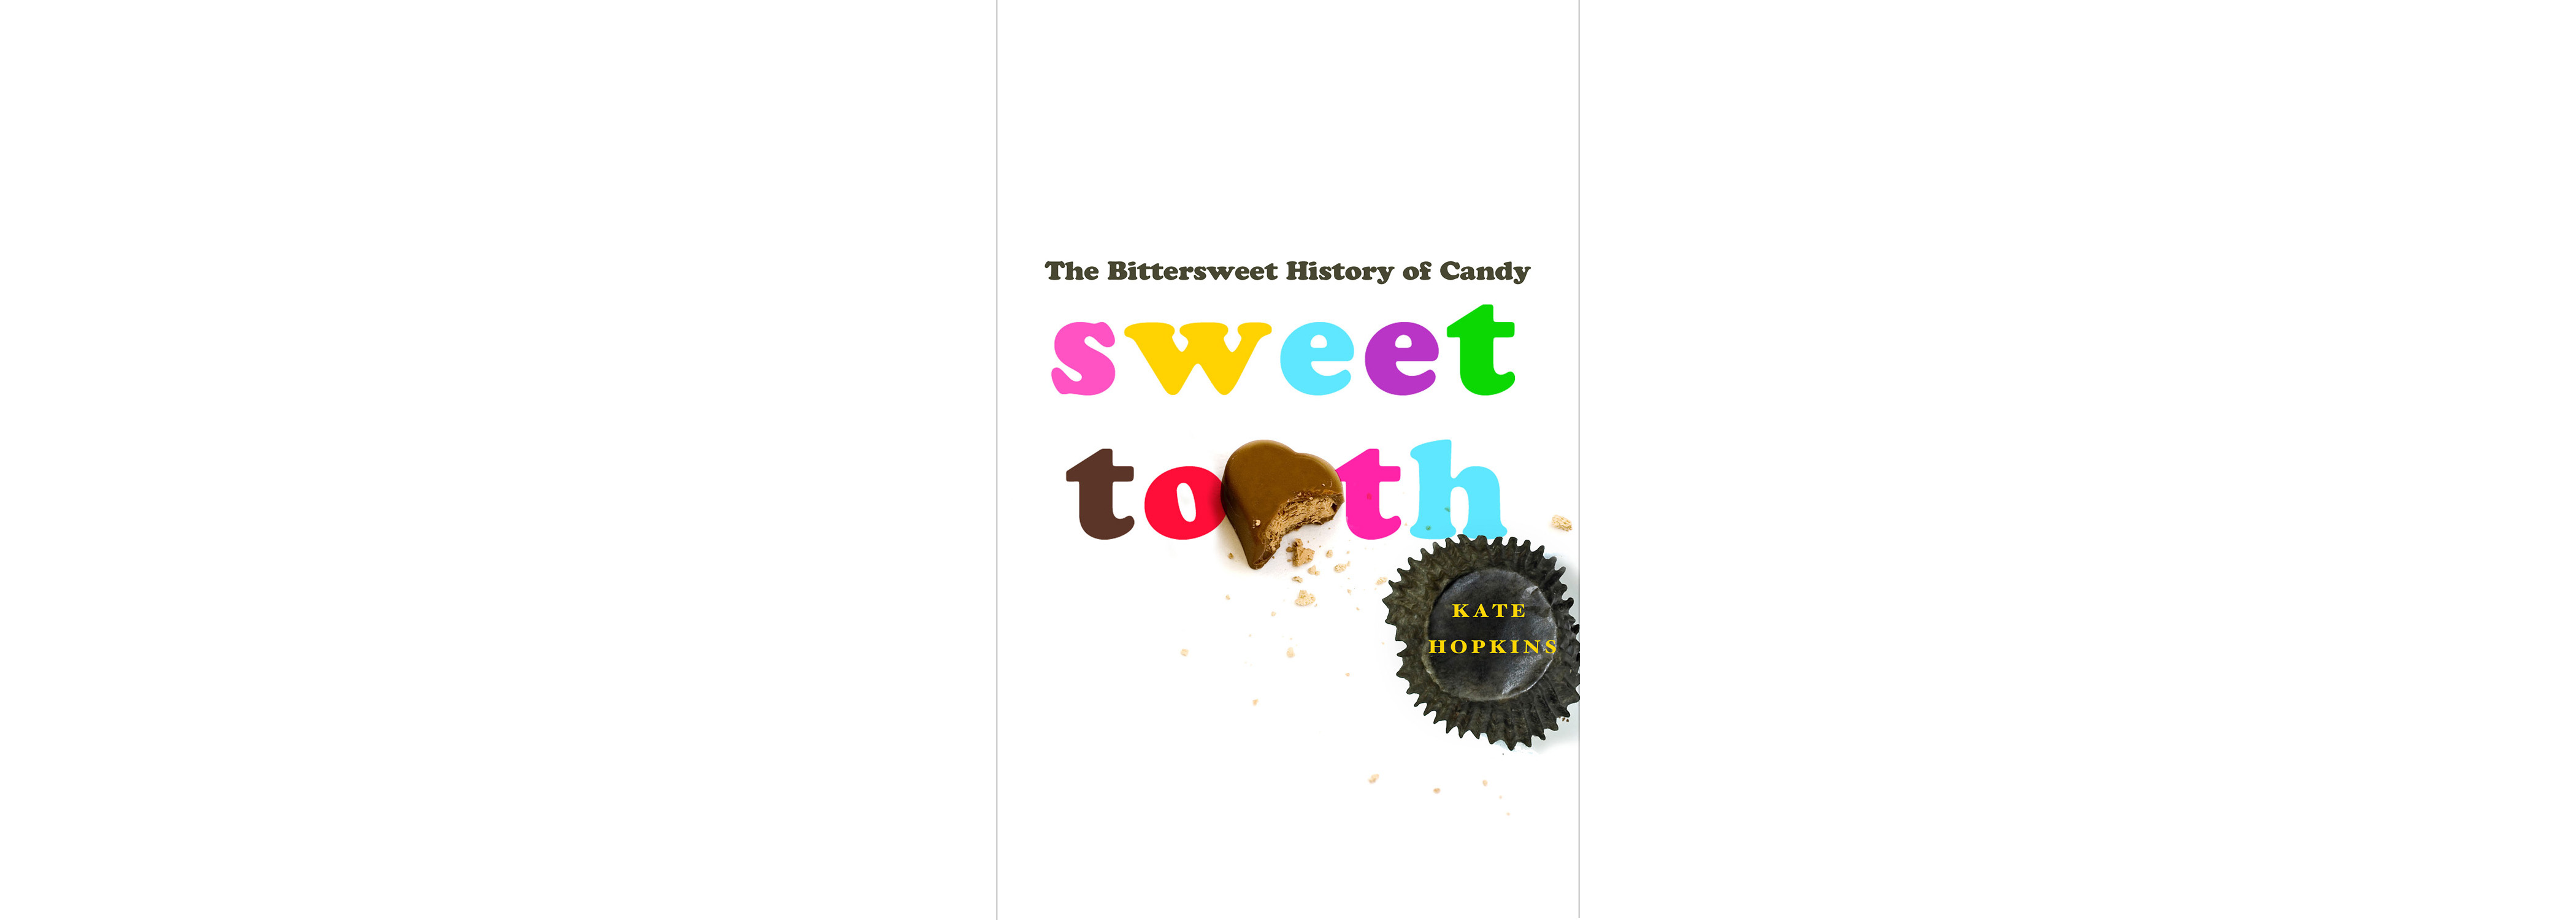 sweet tooth novel review